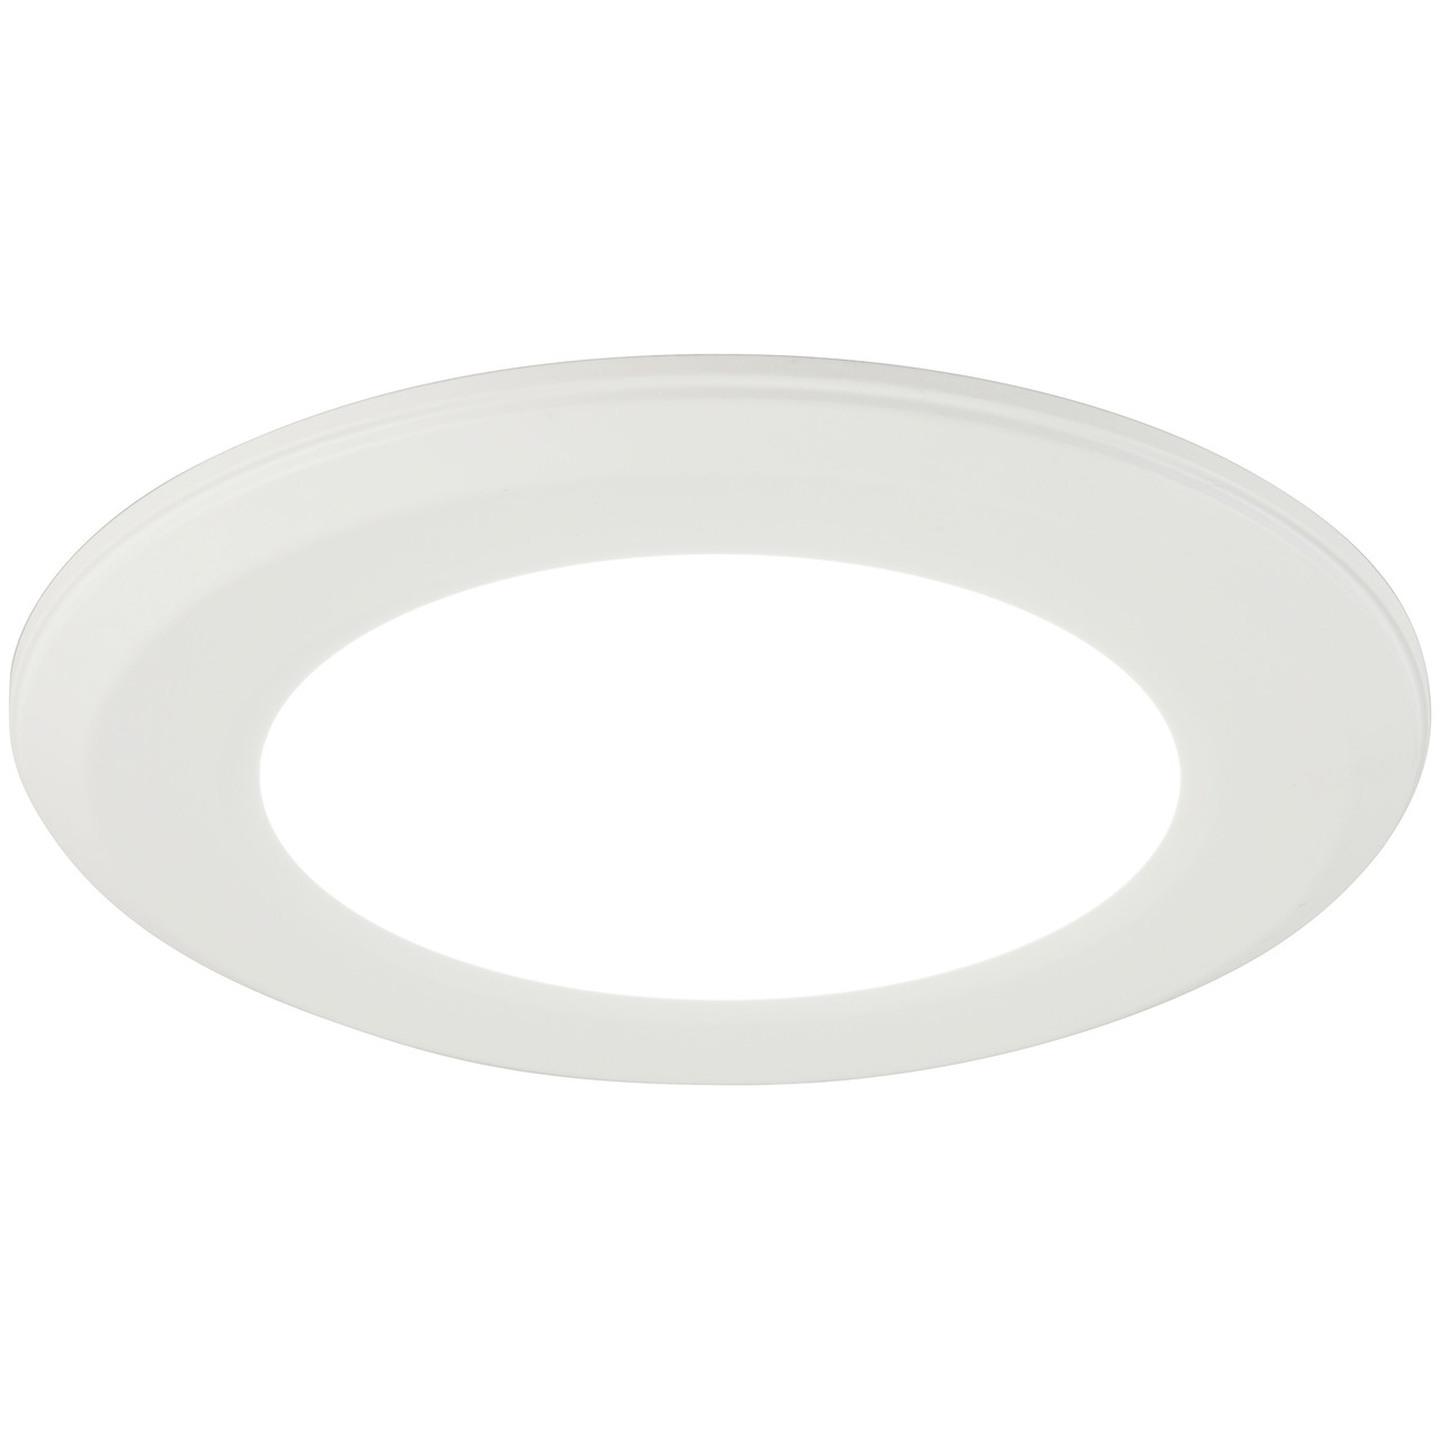 Ultra-Thin LED Panel Roof Light 6W 120mm Cool White